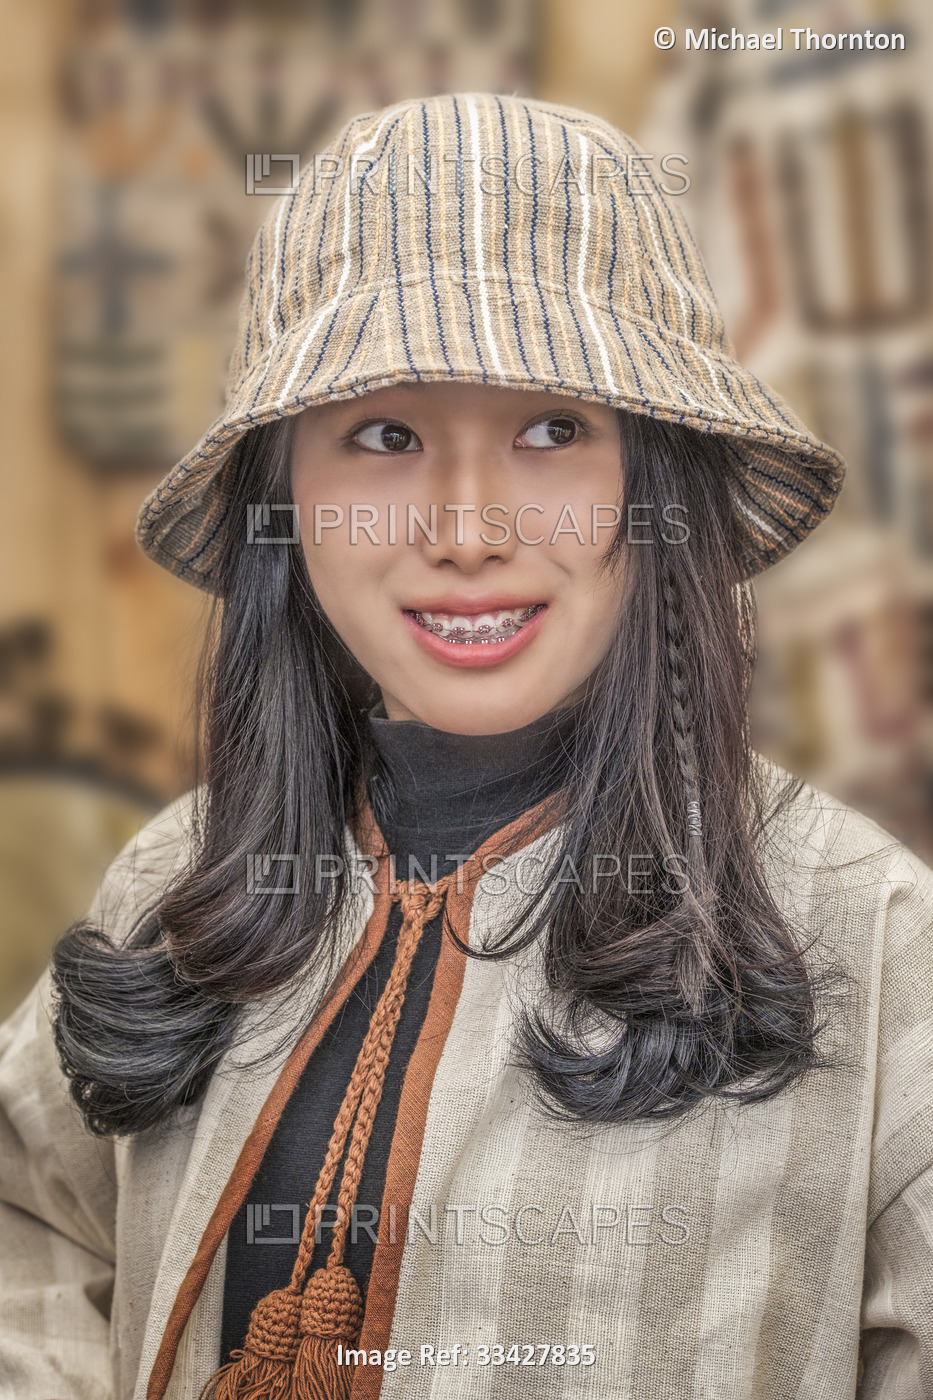 Young Lady at One Nimman Market, Chiang Mai, Thailand, 